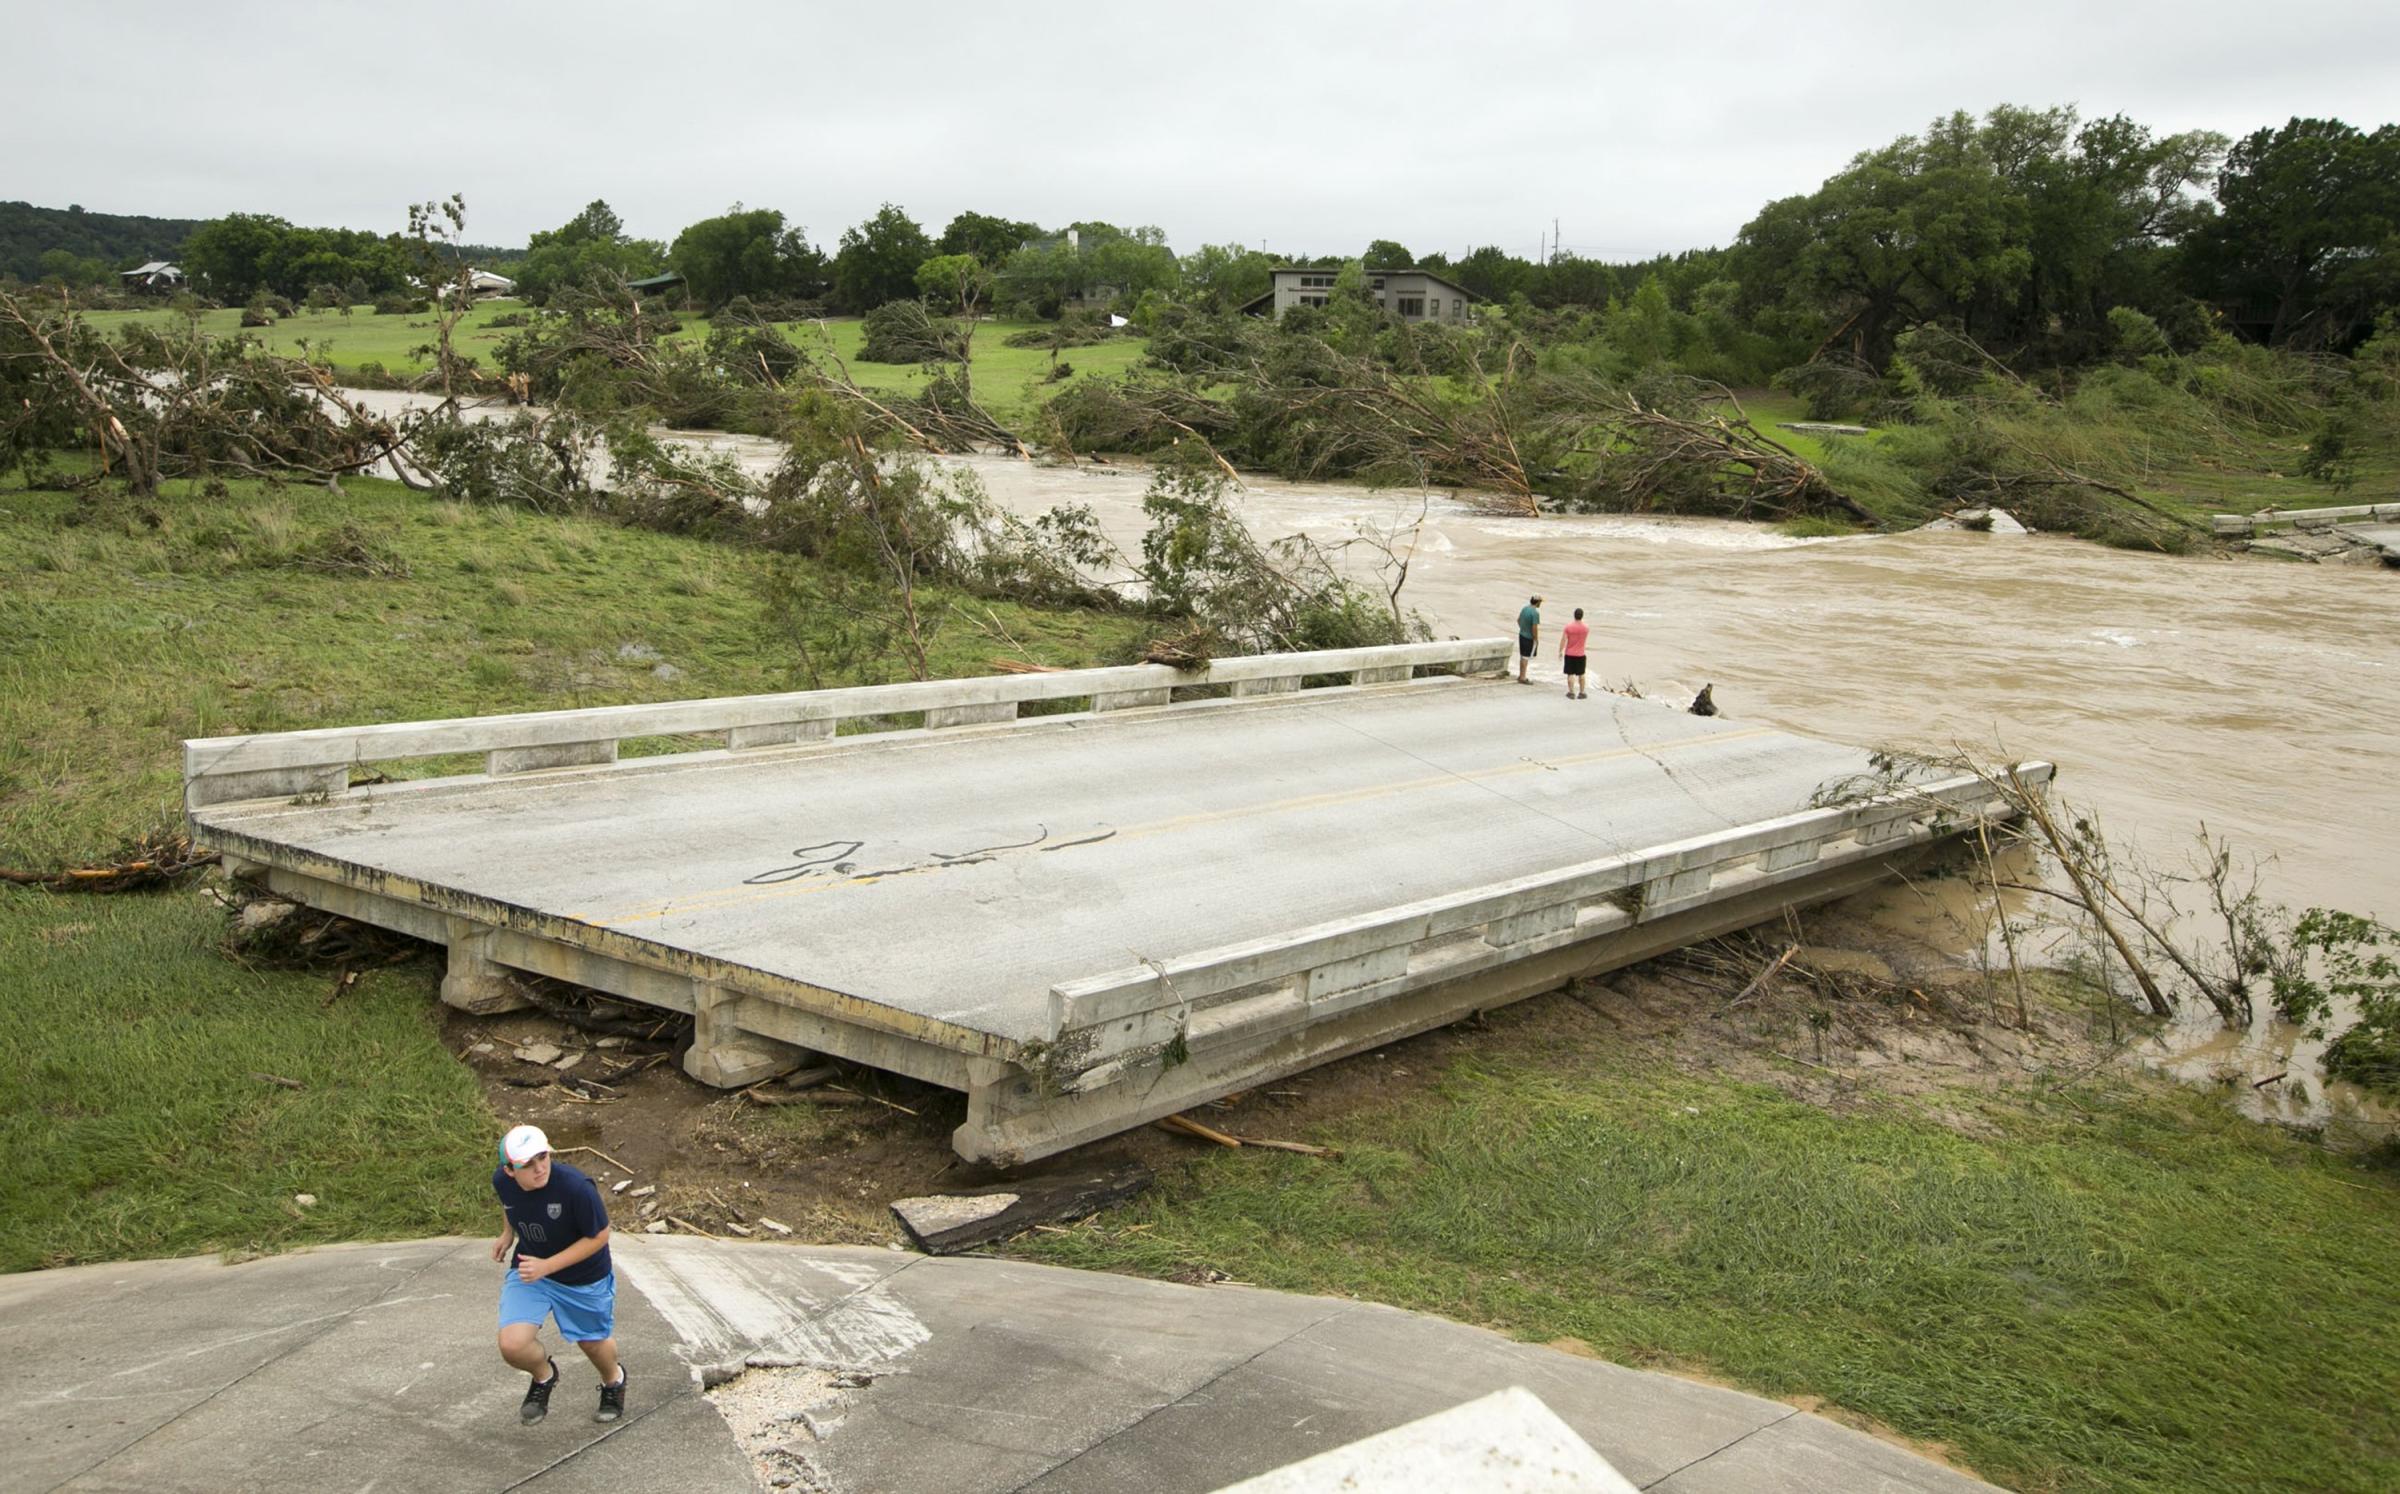 Dustin McClintock, Brandon Bankston, and Hesston Krause look at the destroyed remains of the Fischer Store Road bridge over the Blanco River near Wimberley, Texas on May 24, 2015.